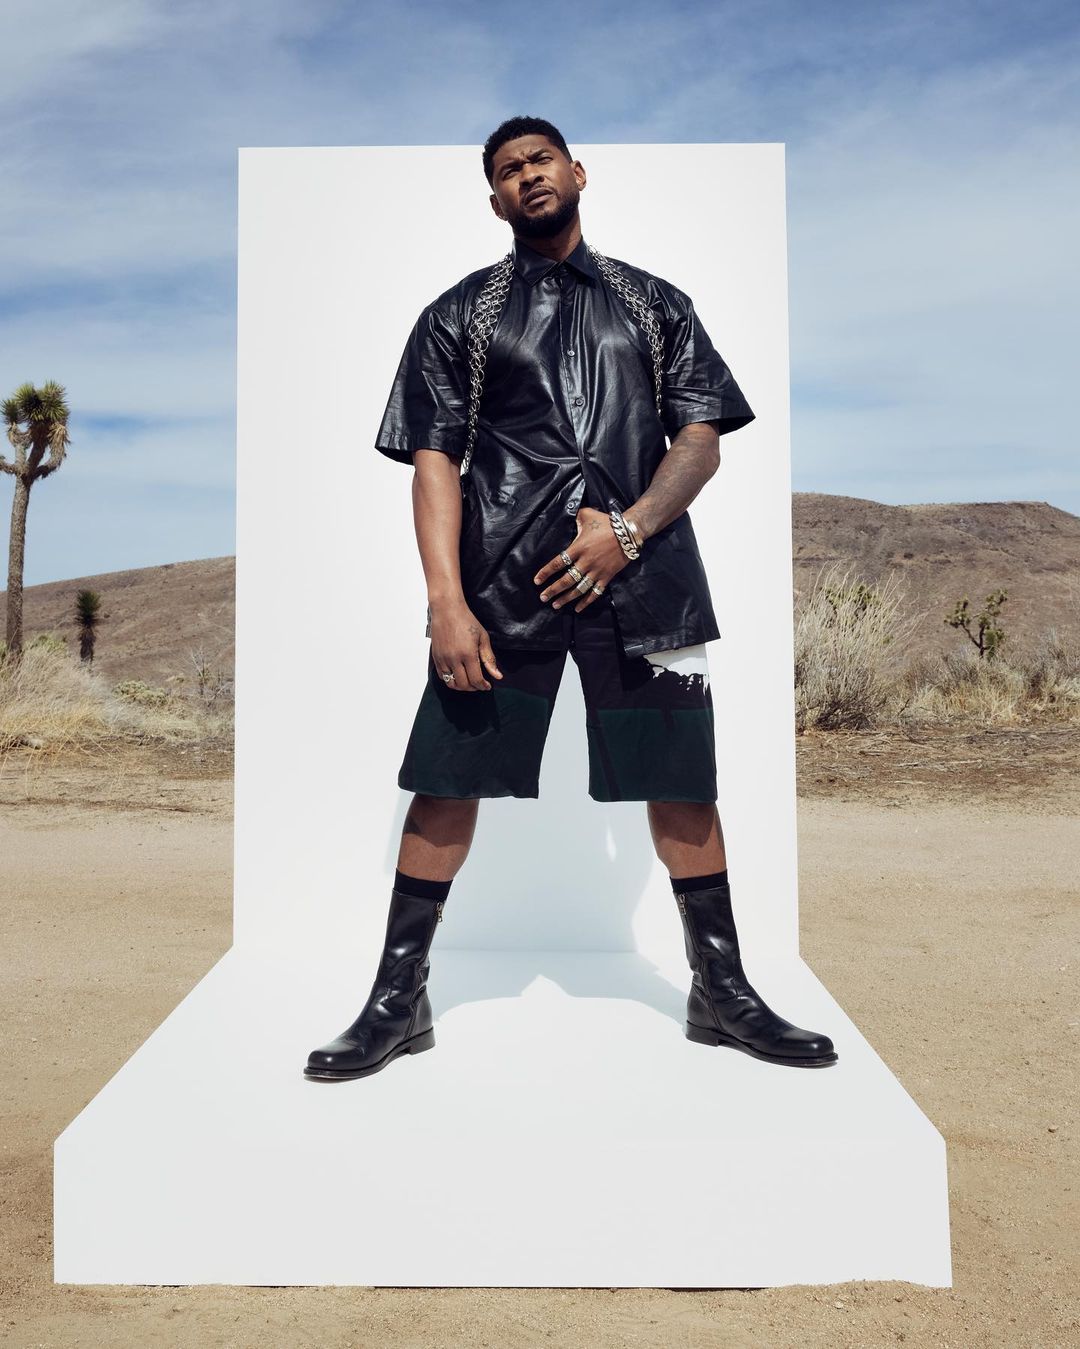 A photo showing Usher standing on a white color platform in a black leather outfit and shorts to match. 